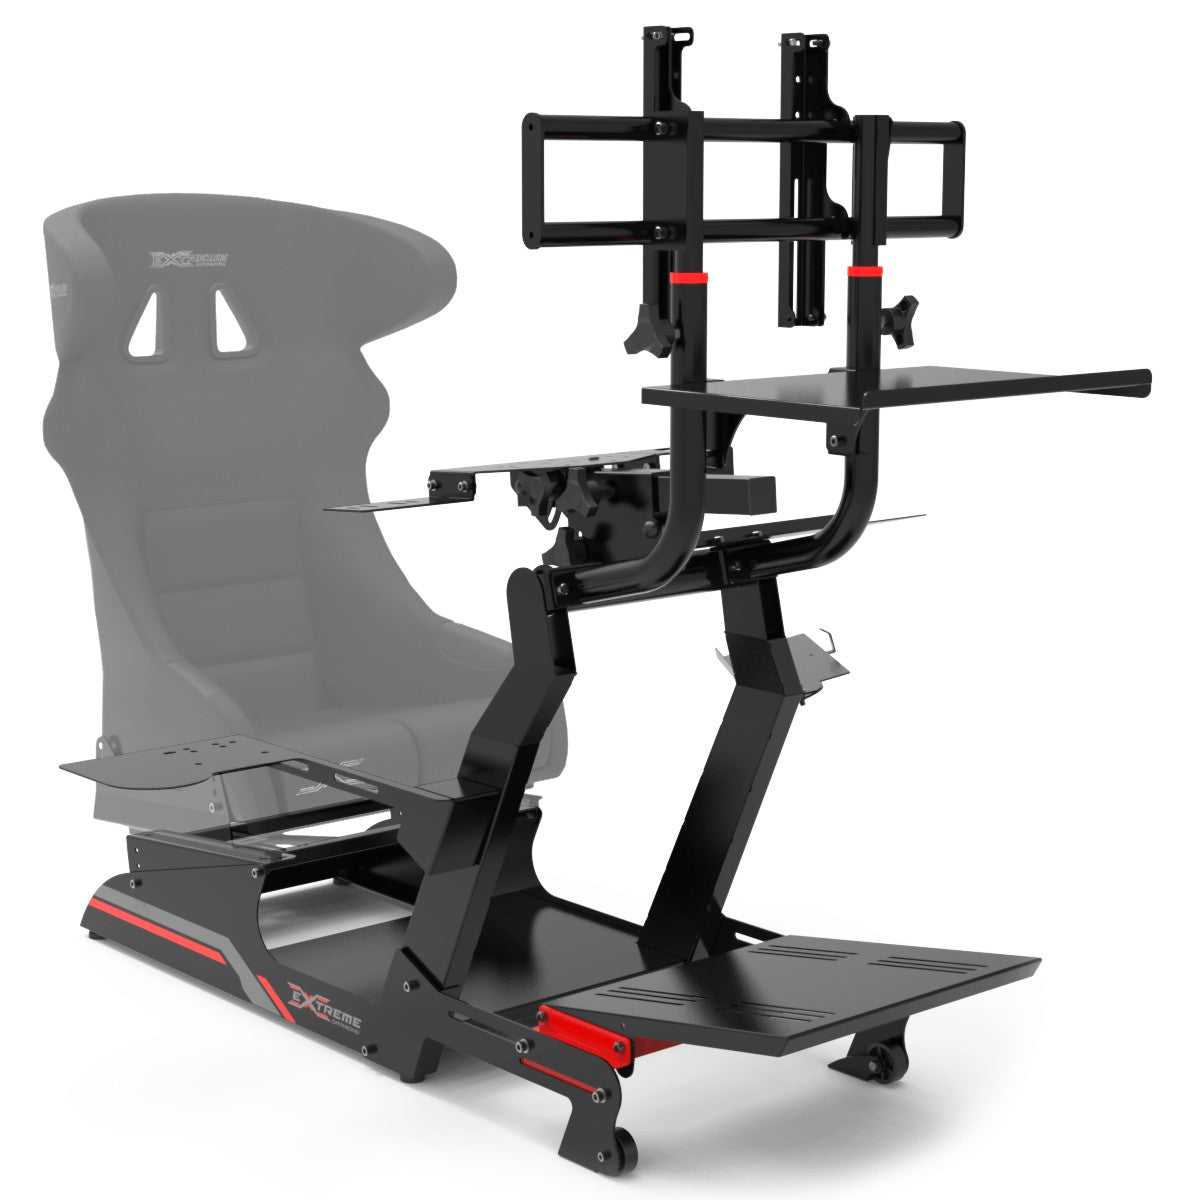 Extreme Sim Racing Chassis 3.0 - Full of Accessories 2517